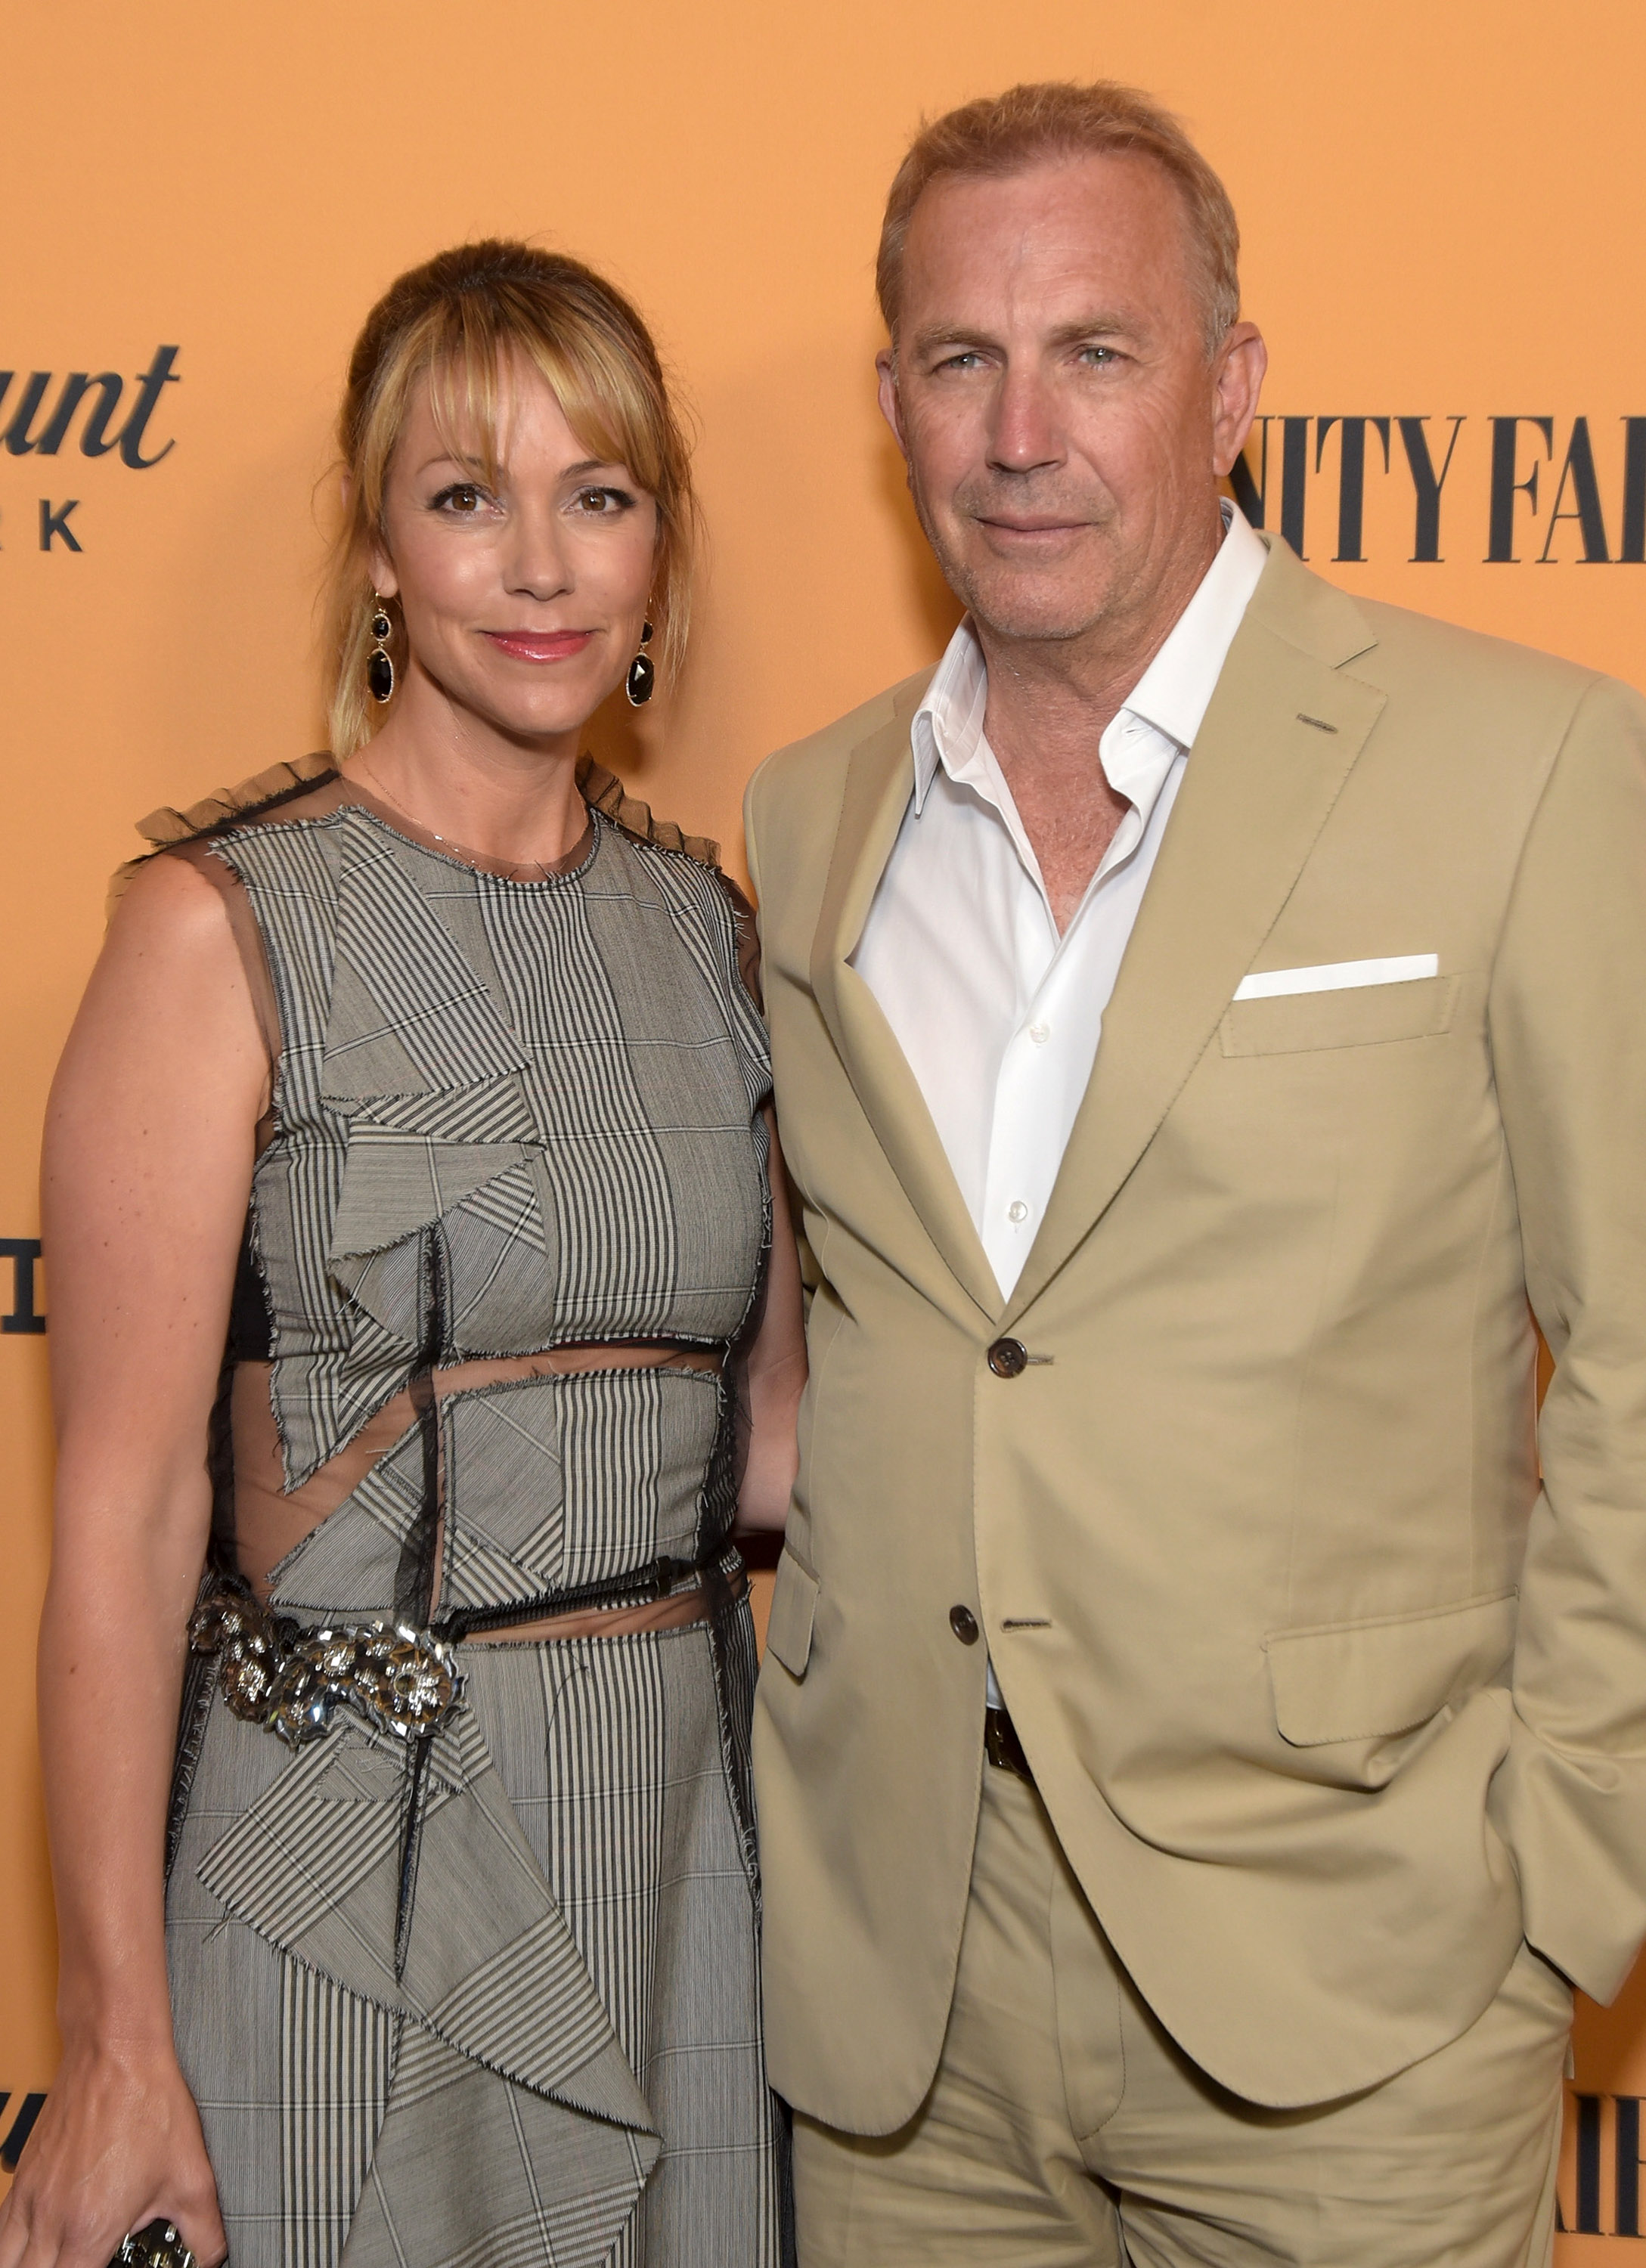 Christine Baumgartner and Kevin Costner attend the premiere of Paramount Pictures' "Yellowstone" at Paramount Studios on June 11, 2018 in Hollywood, California | Source: Getty Images